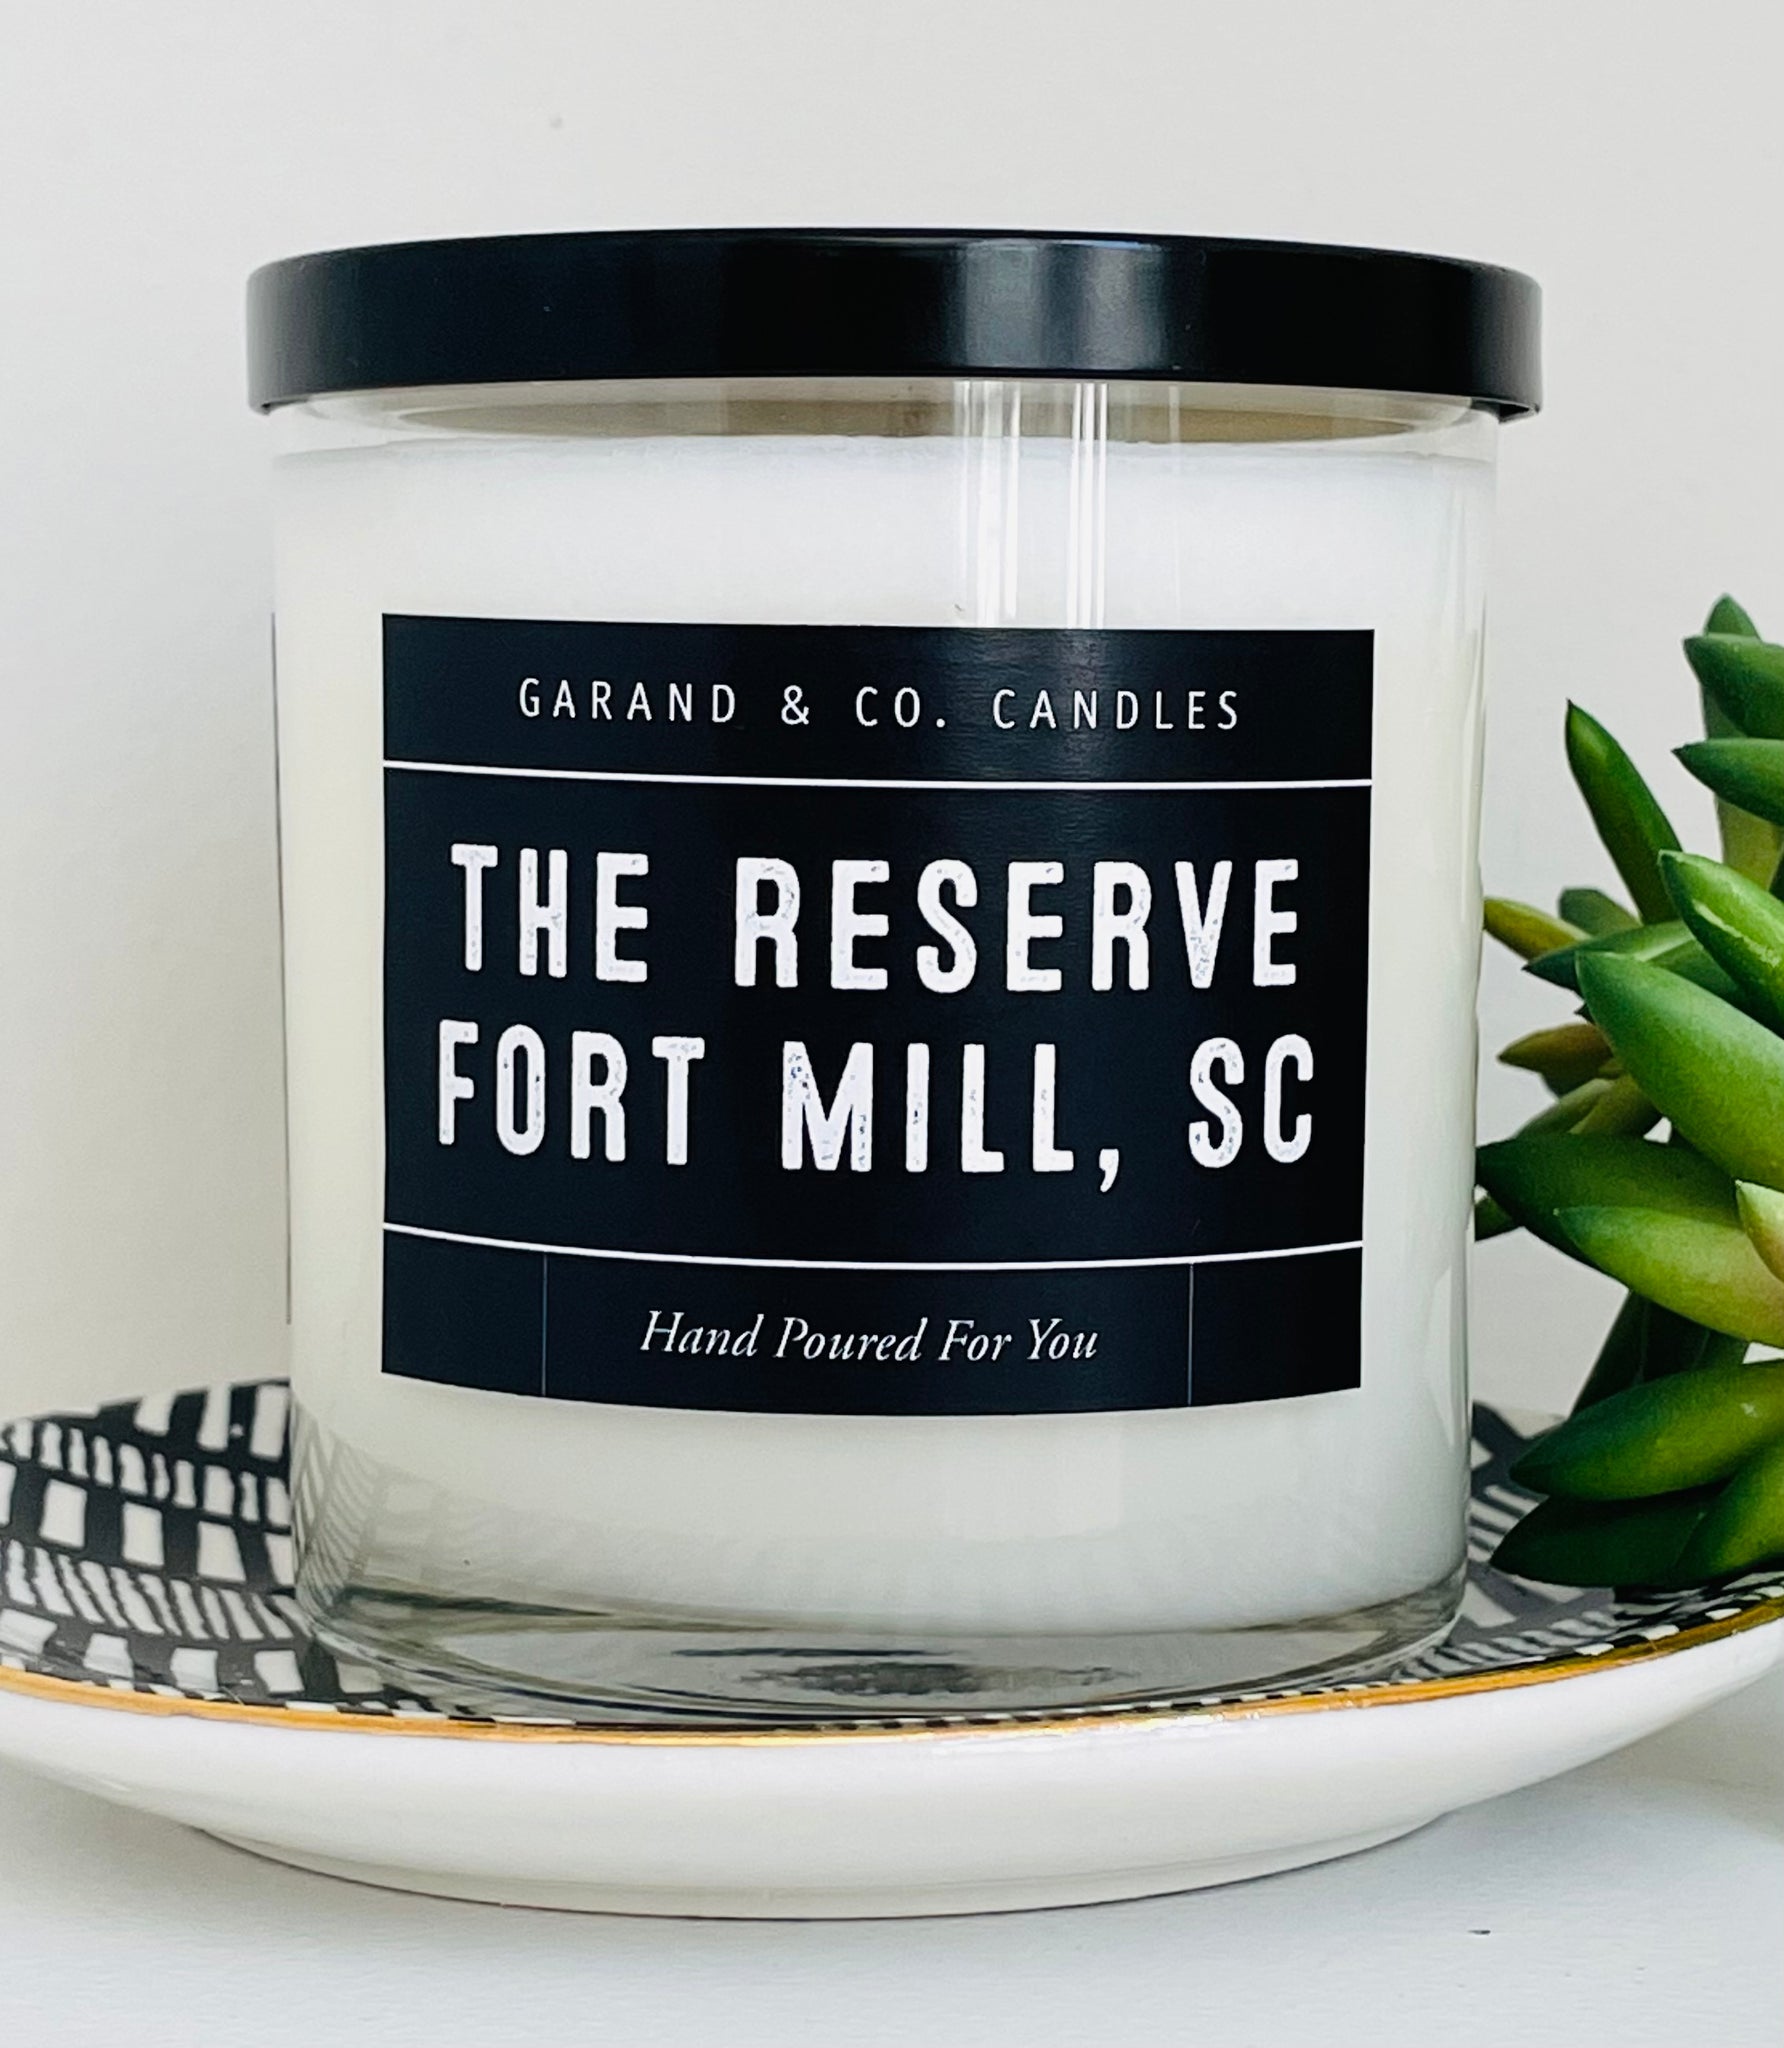 12 oz Clear Glass Jar Candle - The Reserve Fort Mill SC